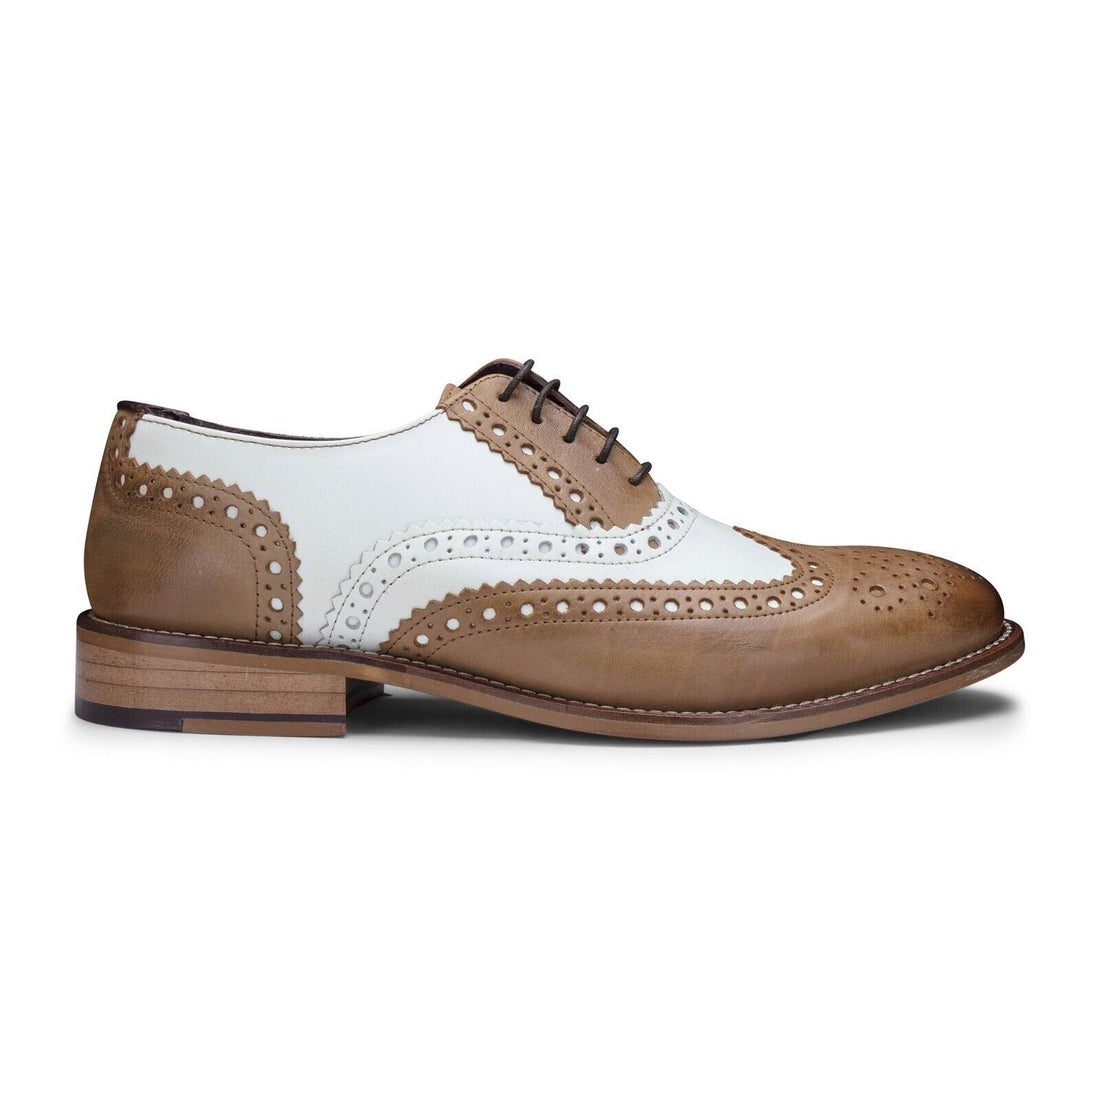 Mens Classic Oxford Tan/White Leather Gatsby Brogue Shoes - Upperclass Fashions 